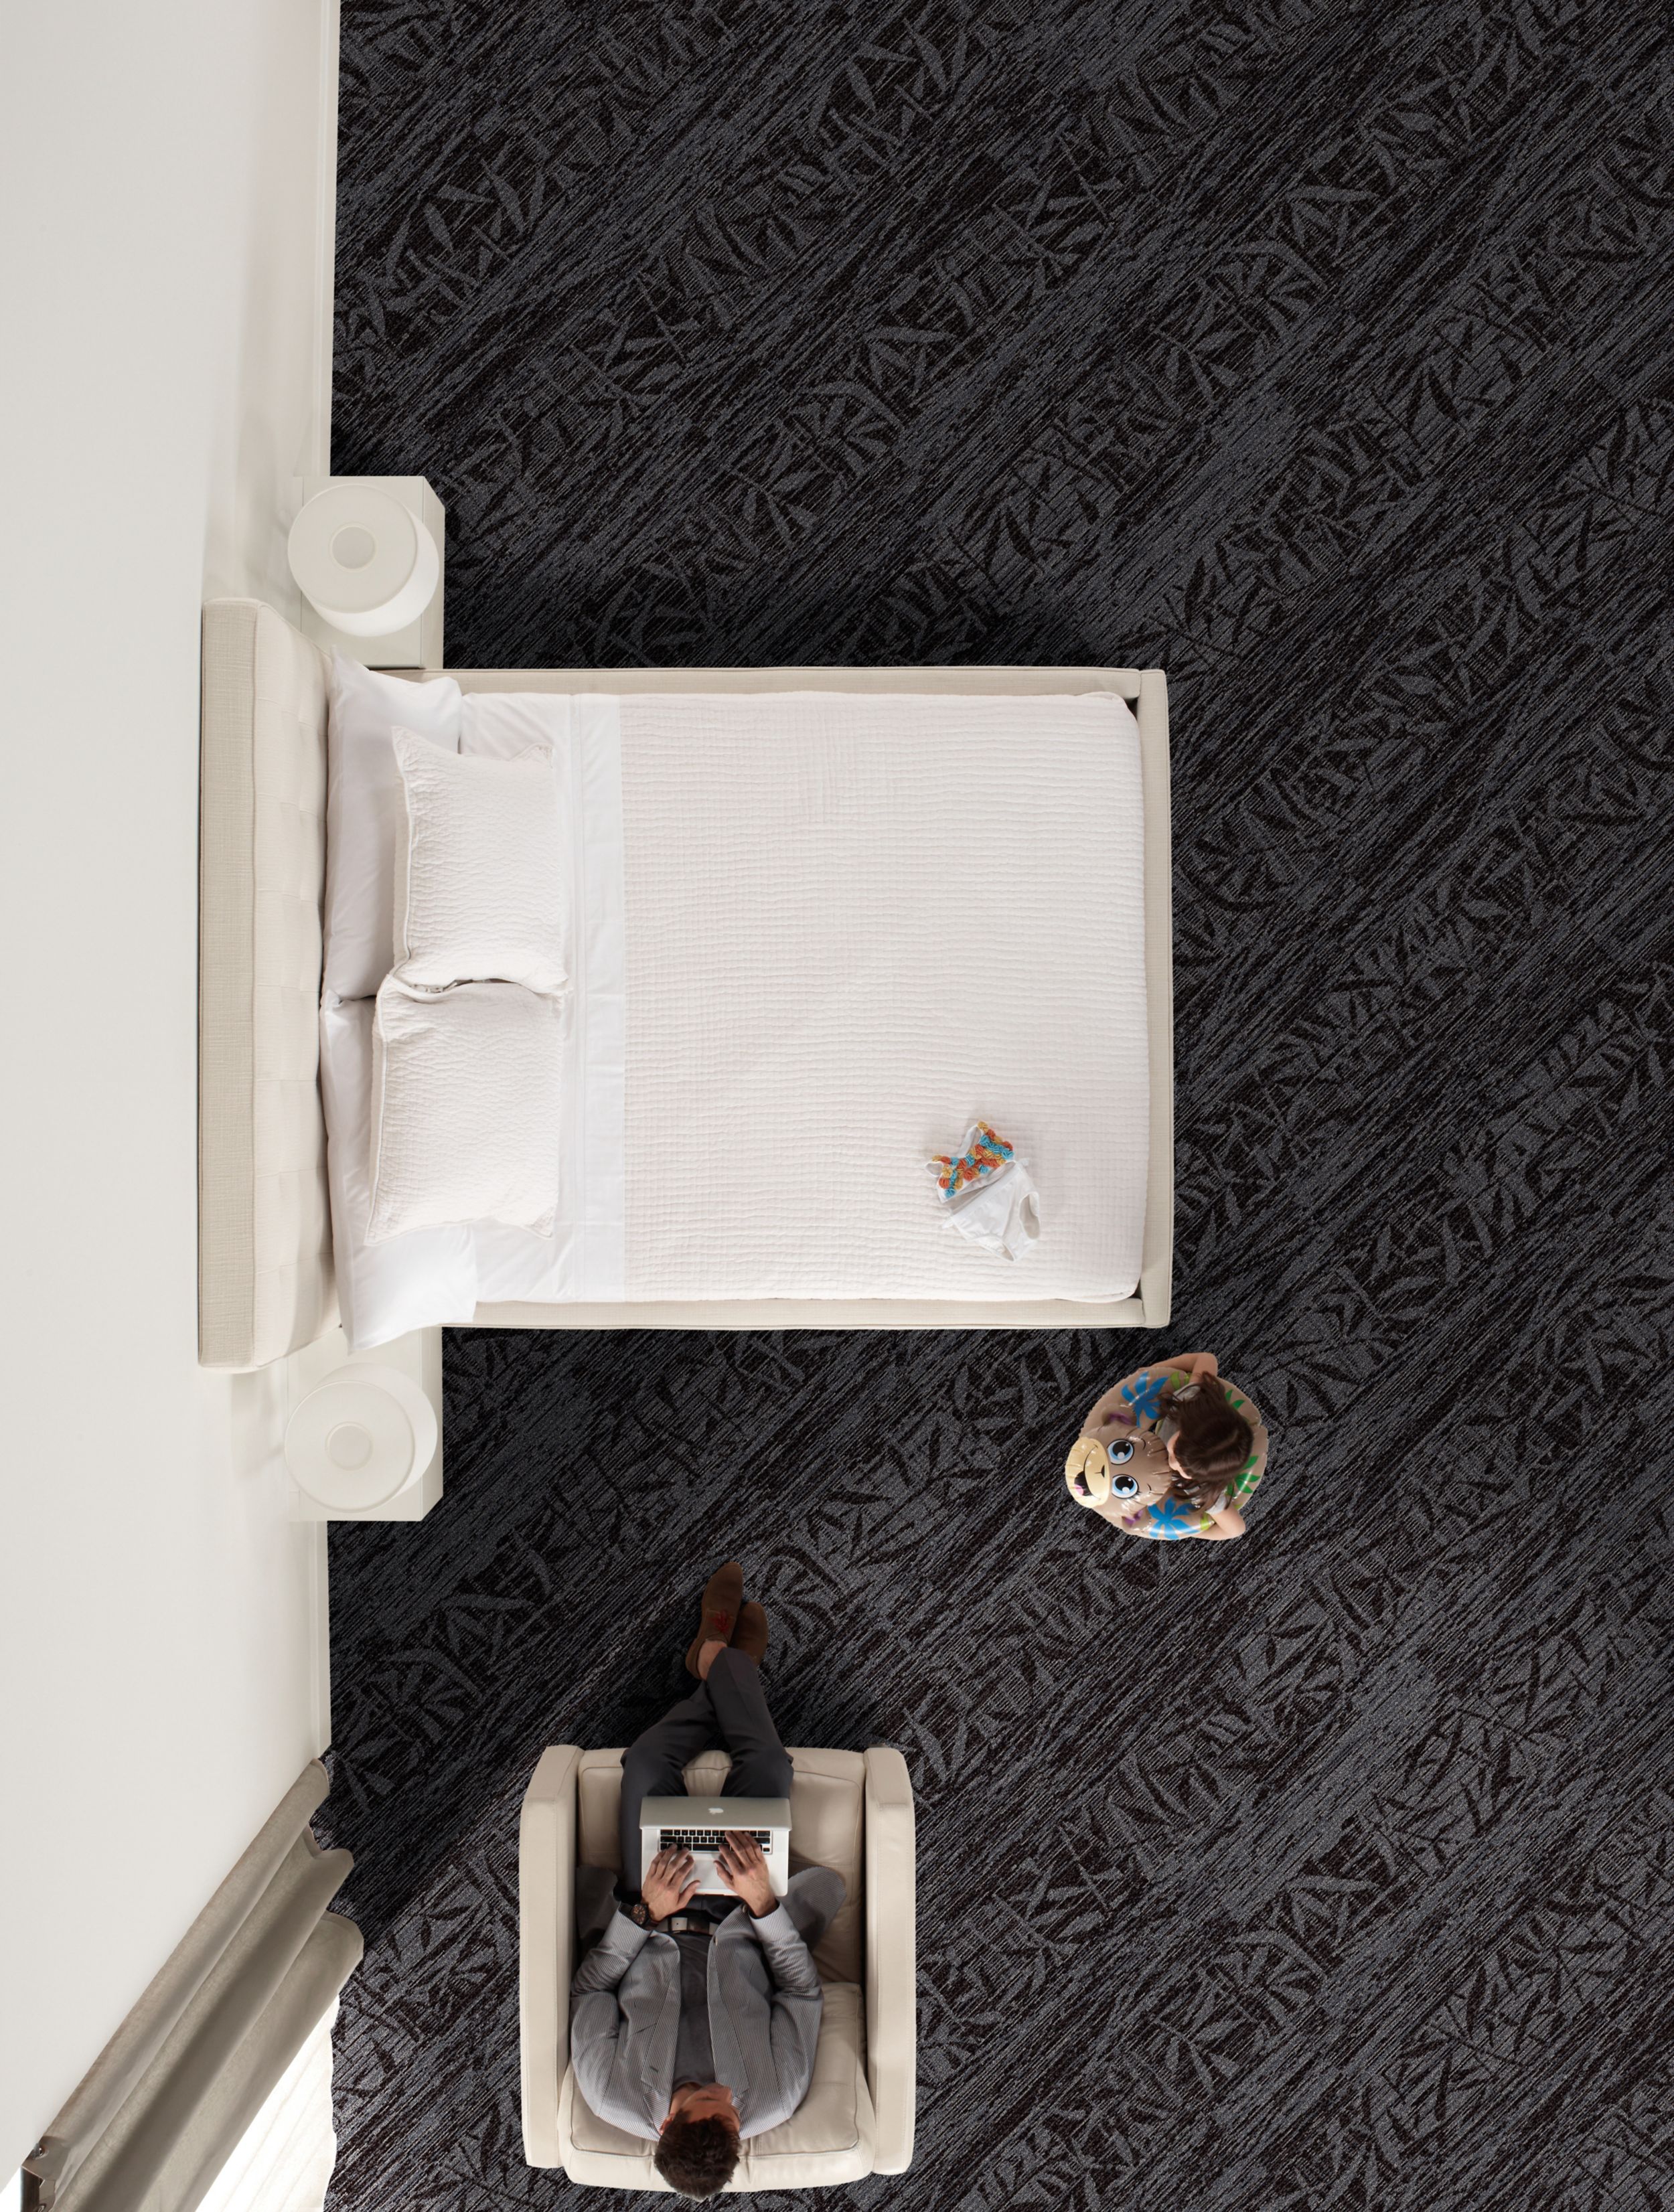 Interface RMS 507 and RMS 508 plank carpet tile in hotel guest room with woman on computer and girl holding stuffed animal imagen número 7